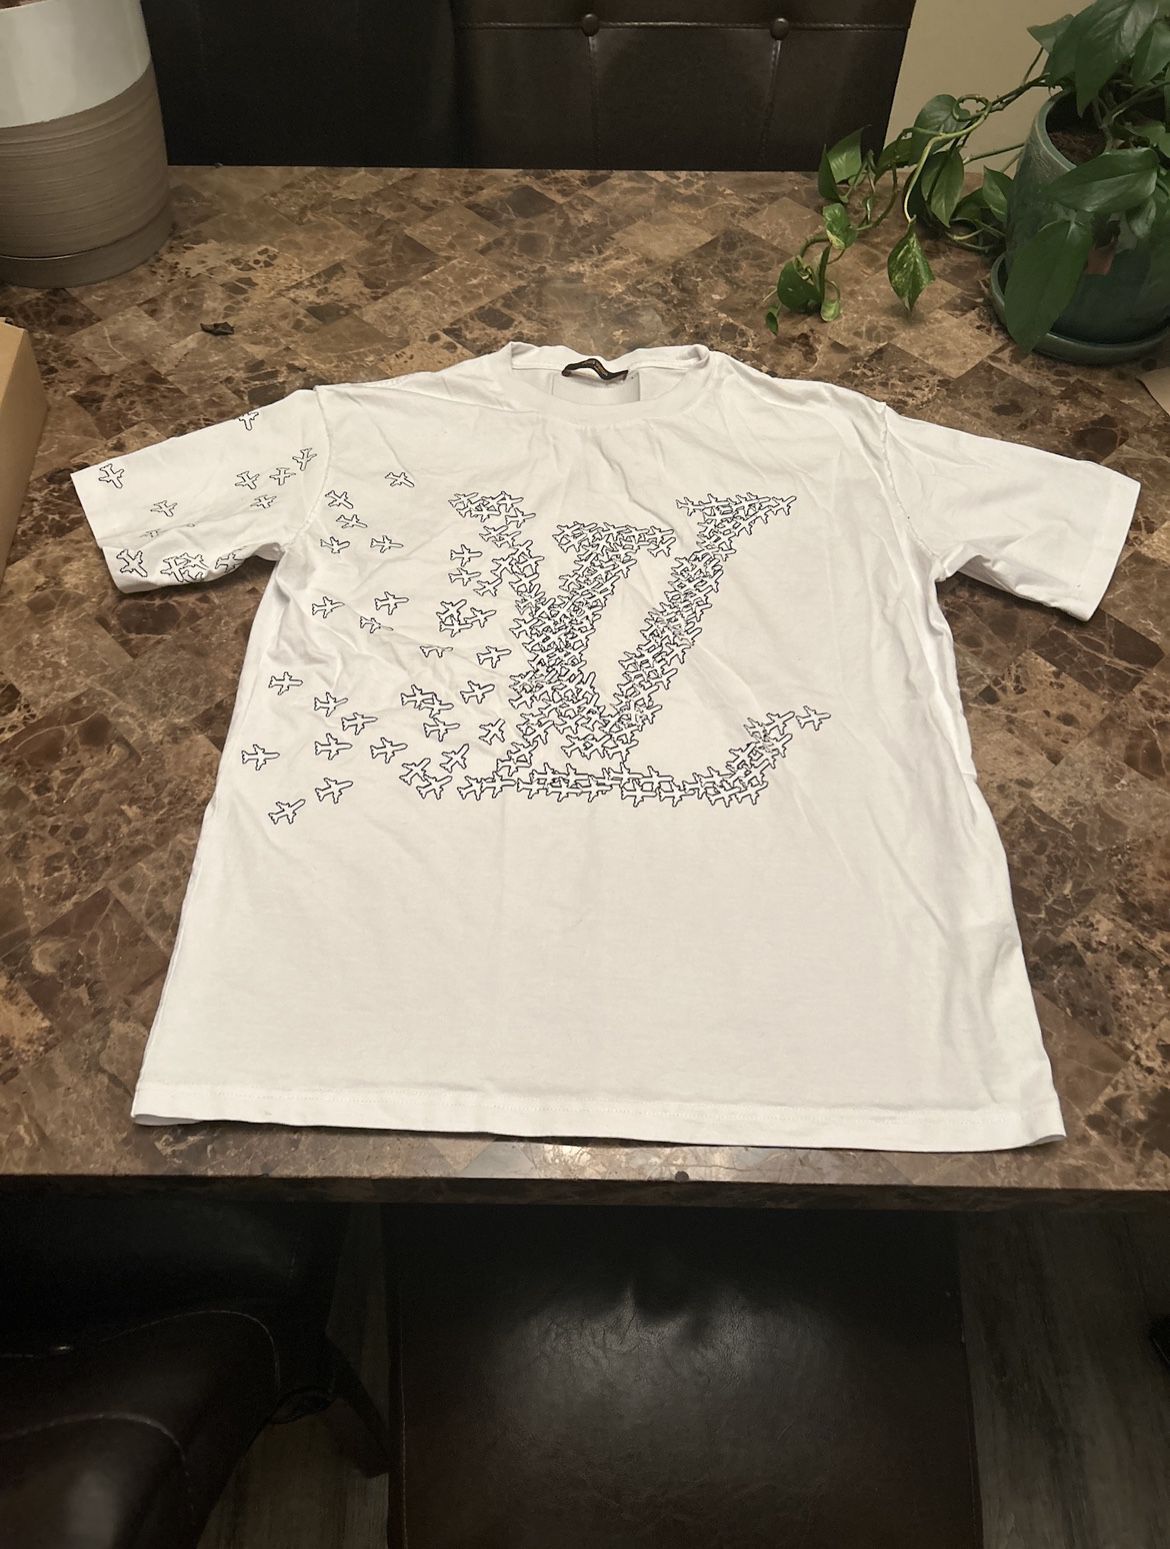 Louis Vuitton x Virgil Abloh '2054' Planes Printed Tee for Sale in